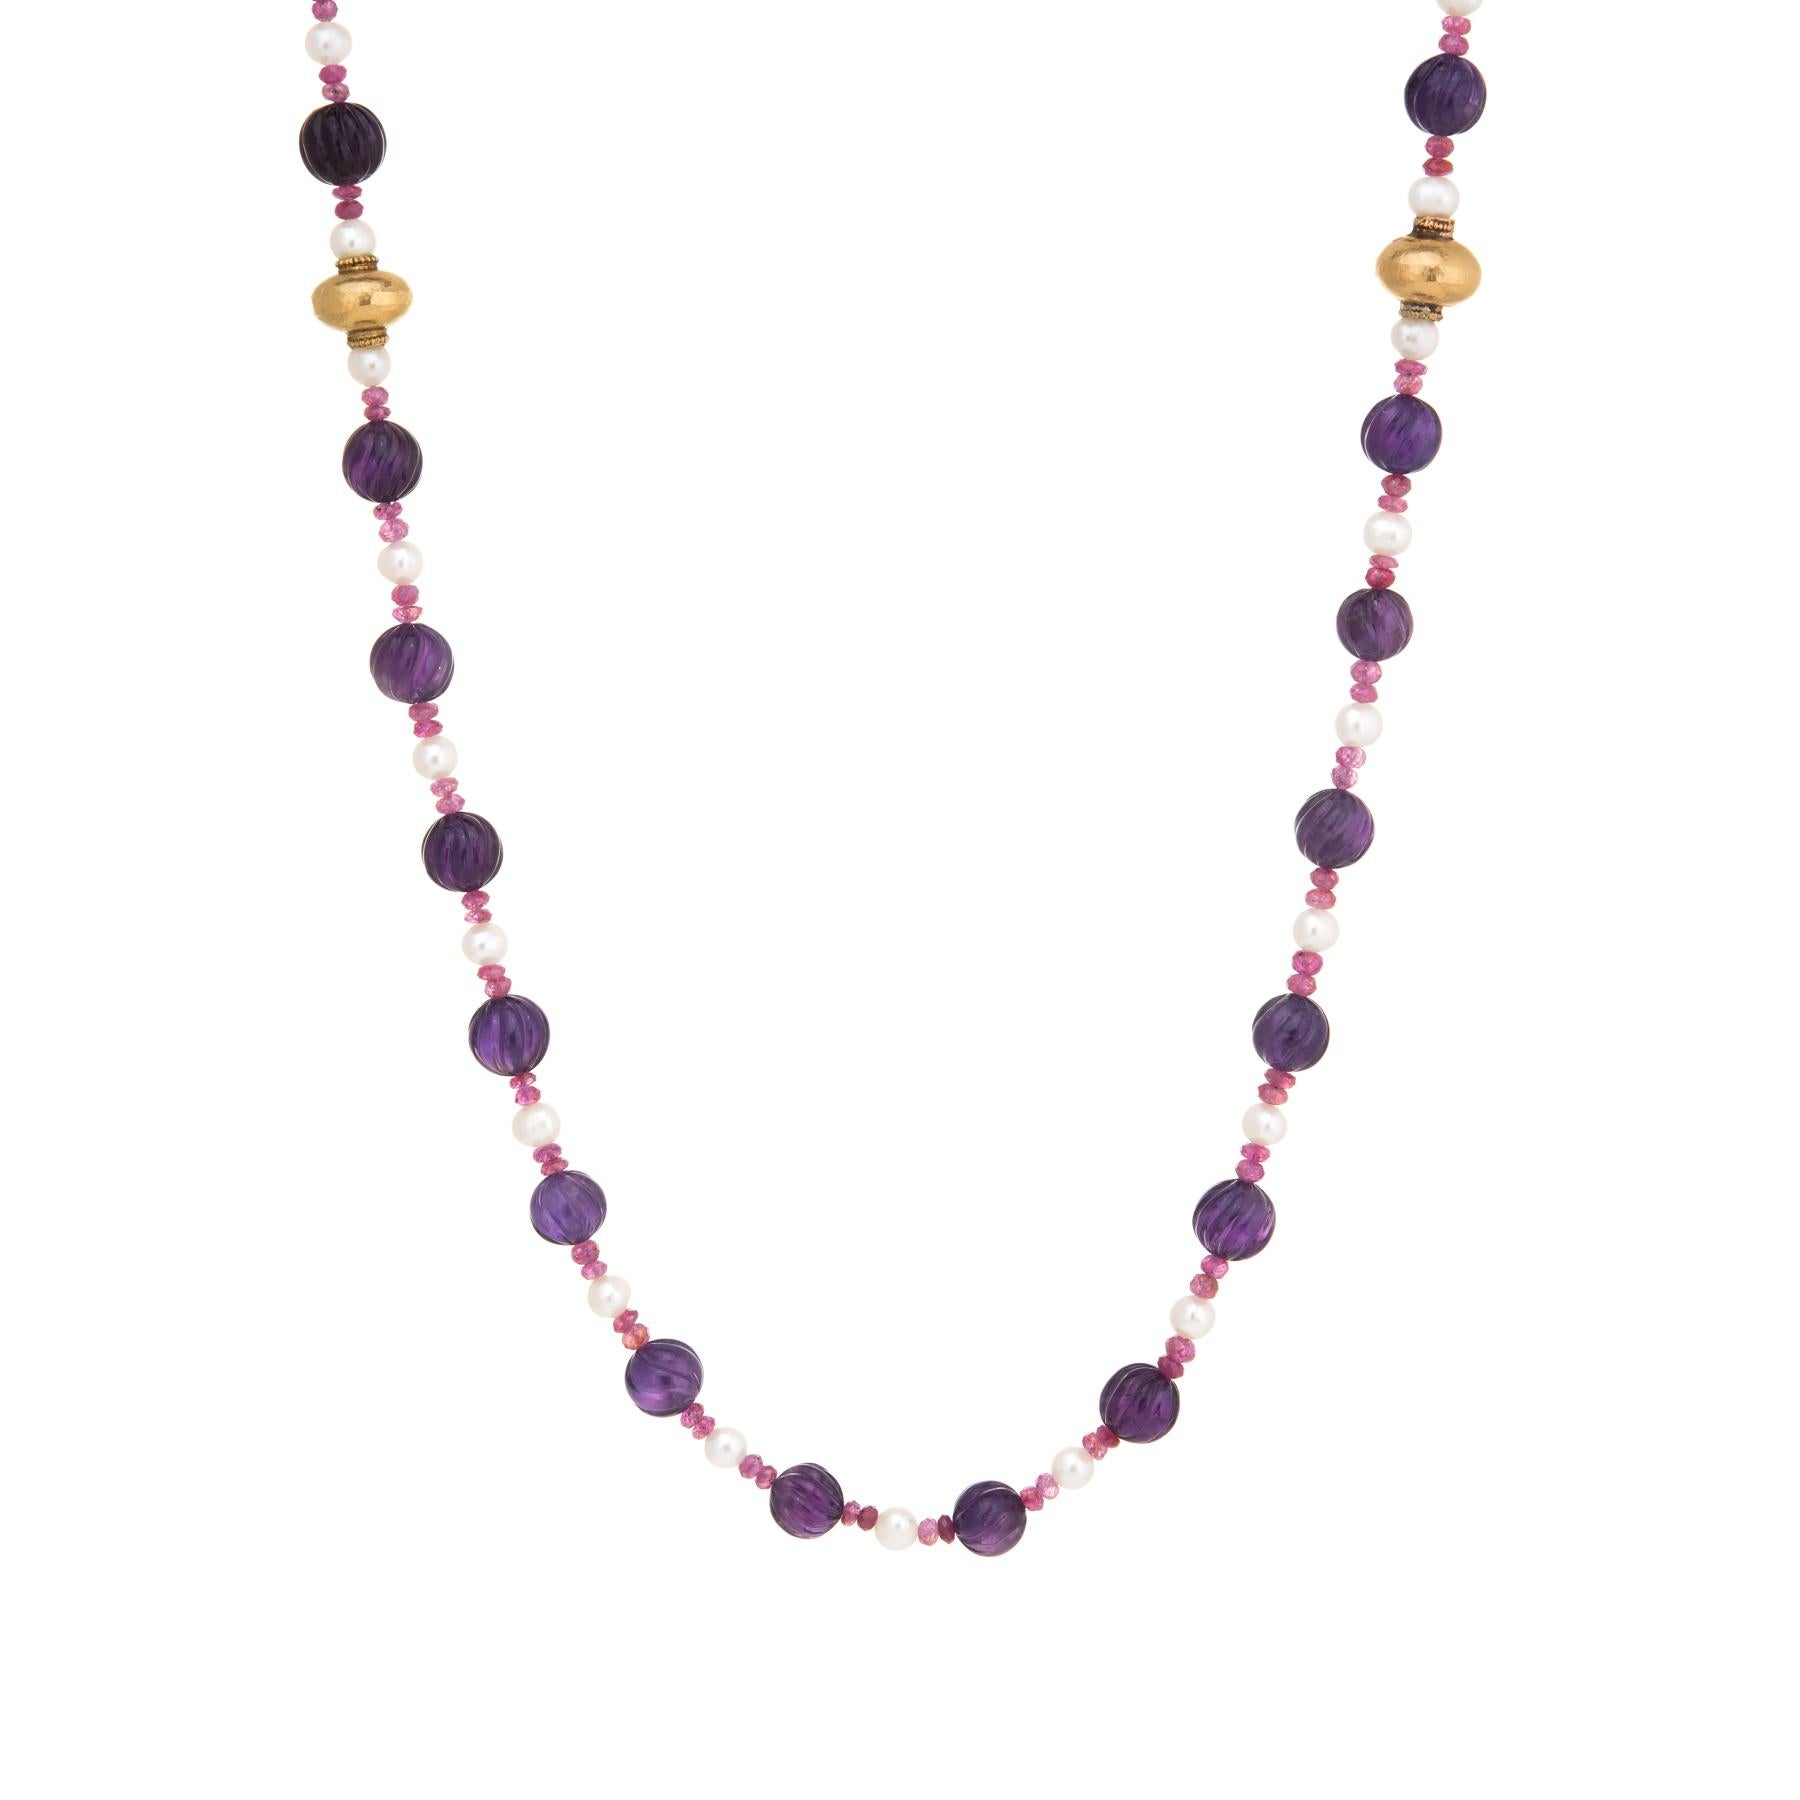 Women's Vintage Fluted Amethyst Ruby Pearl Bead Necklace 14 Karat Gold Long Jewelry